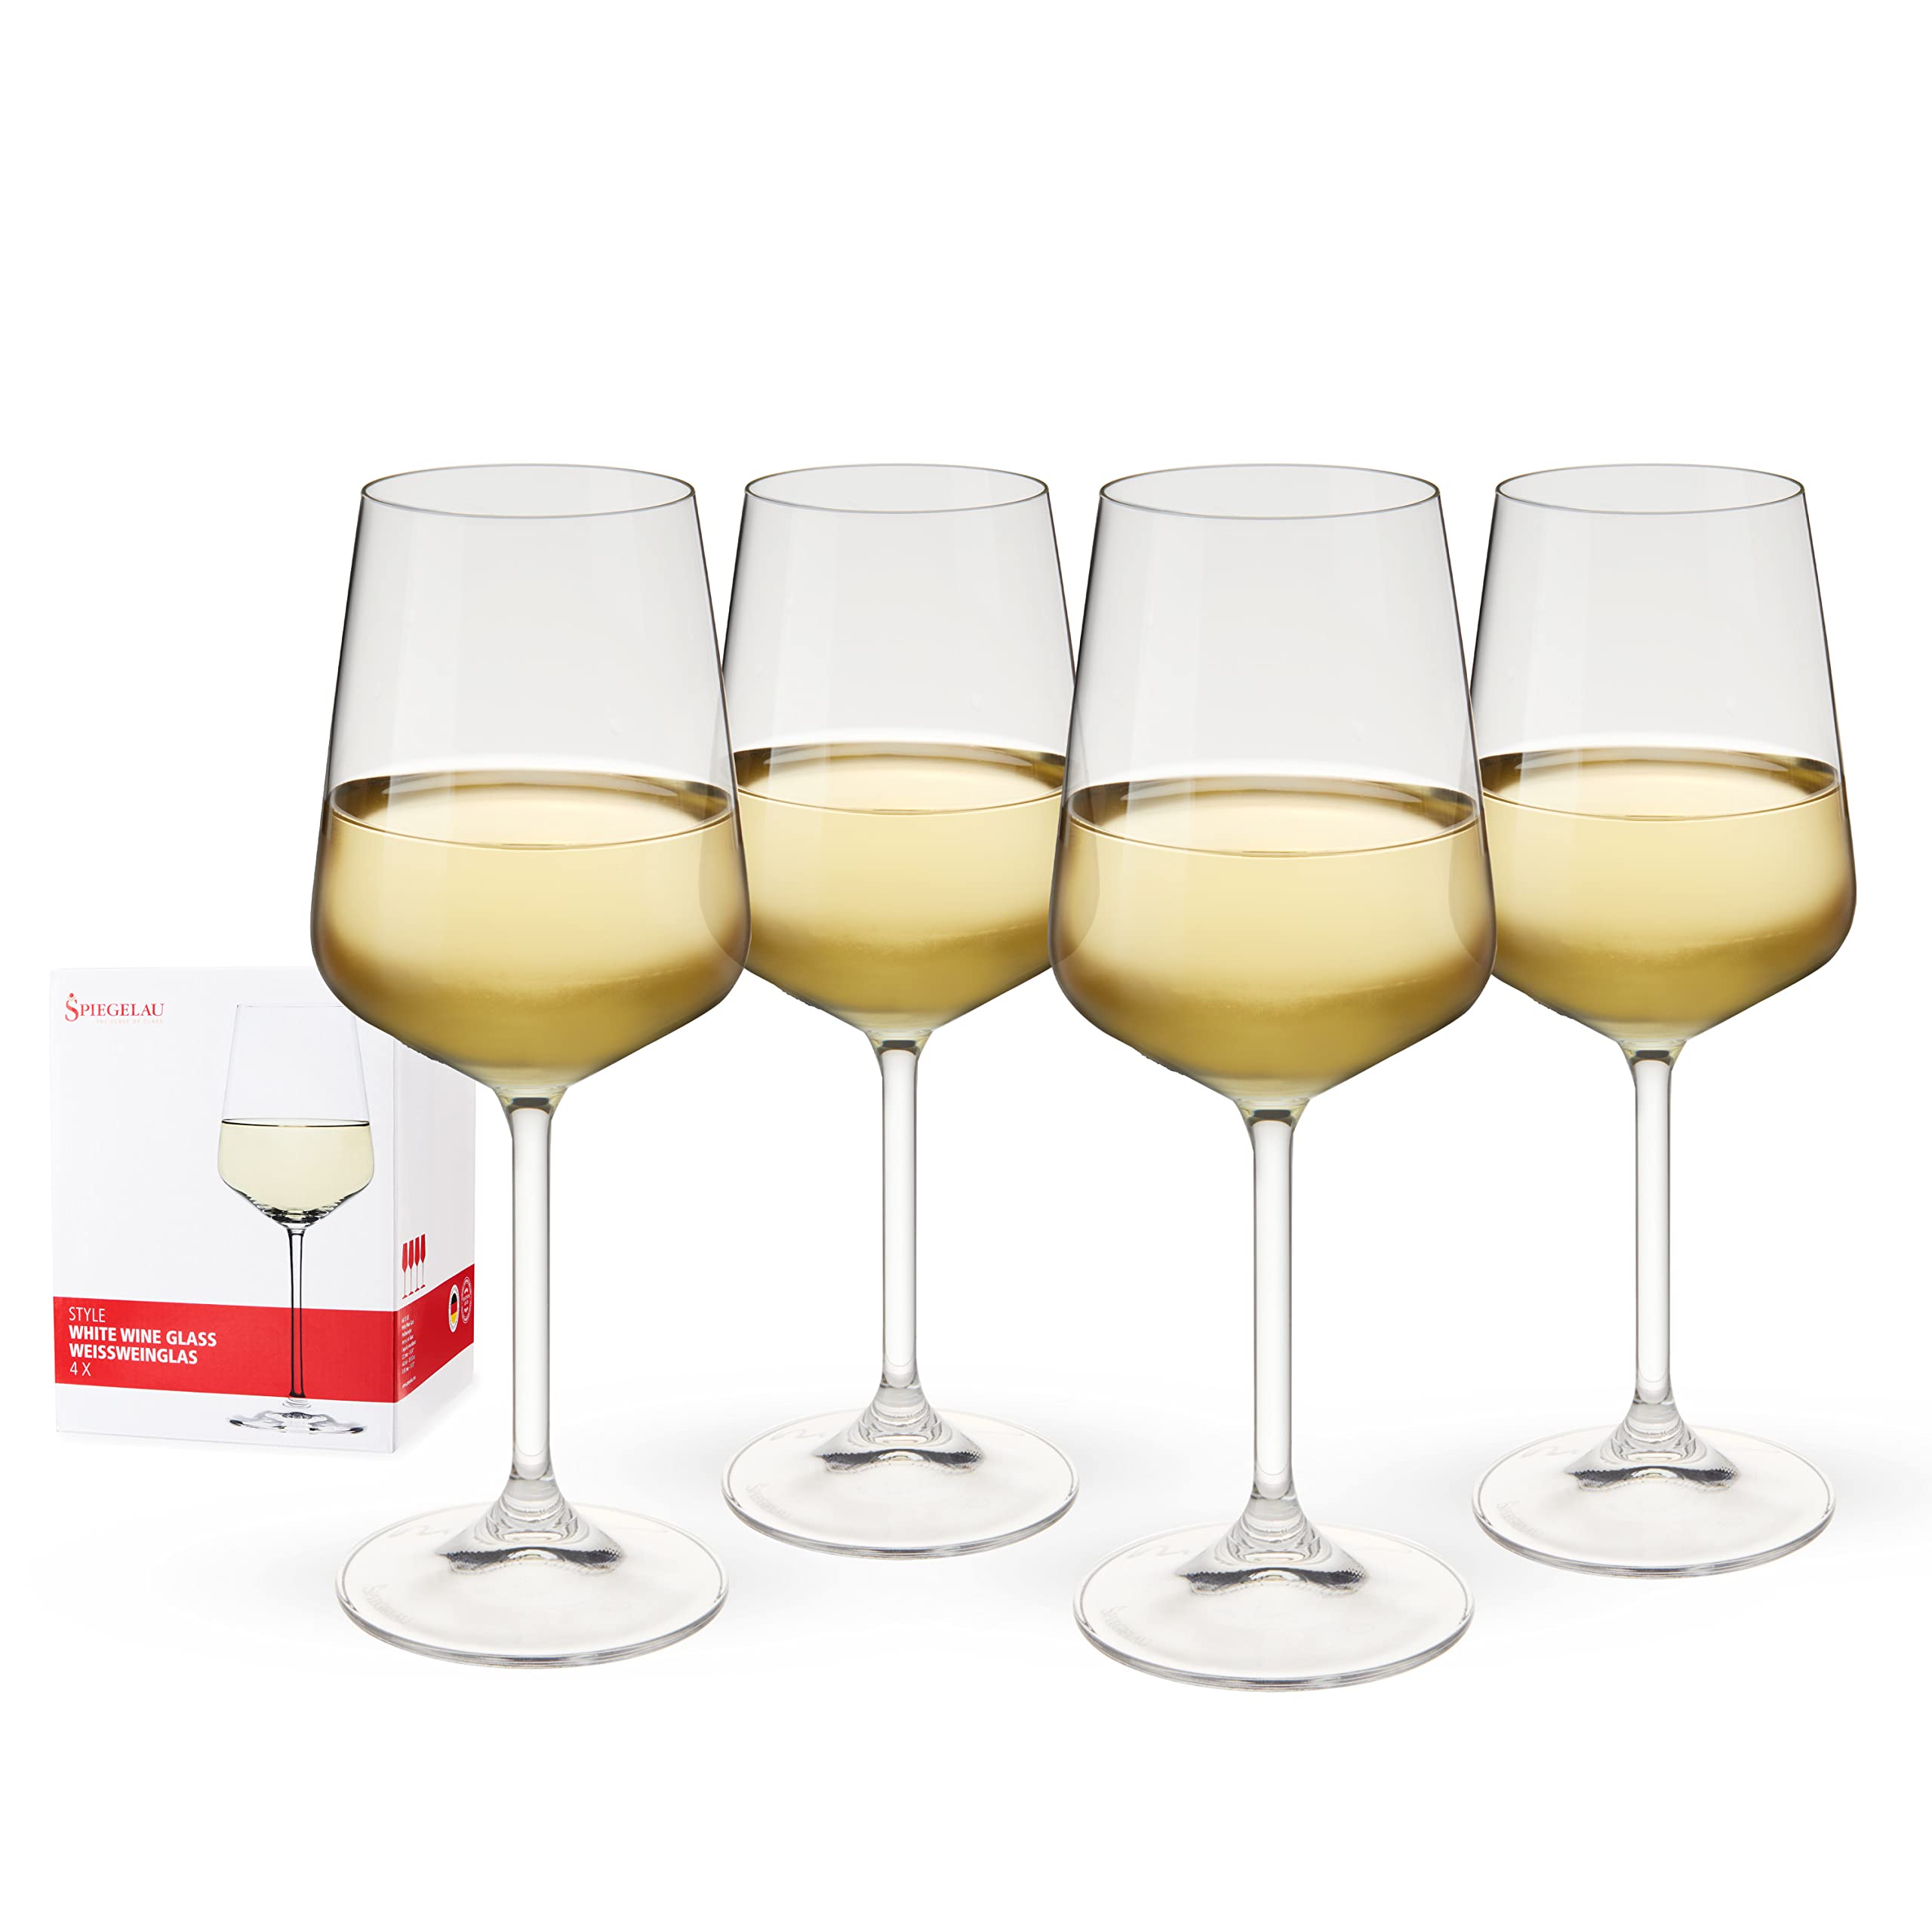 Spiegelau Style White Set of 4 European-Made Lead-Free Crystal, Classic Stemmed, Dishwasher Safe, Professional Quality Wine Glas